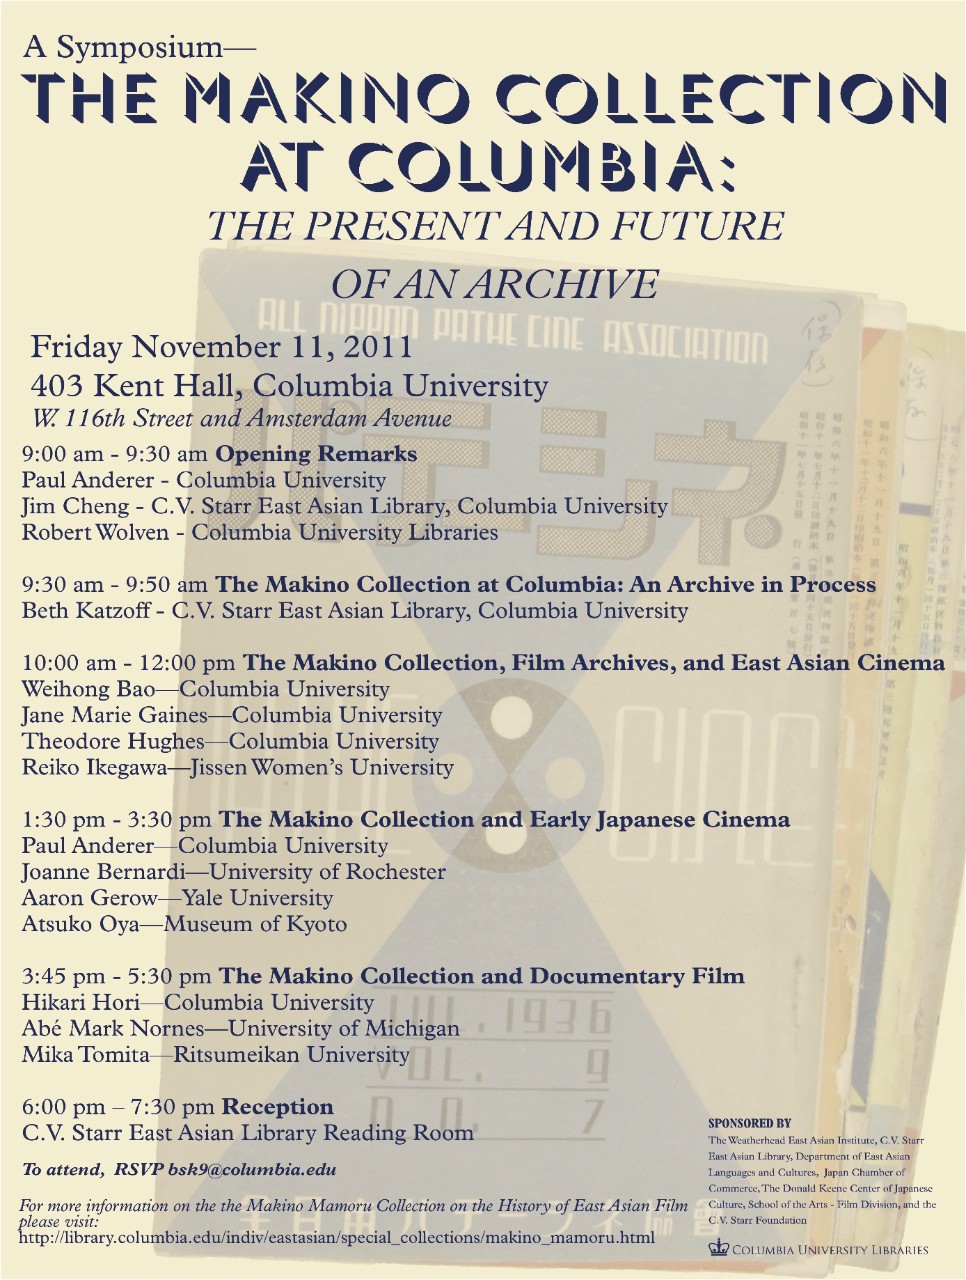 Symposium - The Makino Collection at Columbia